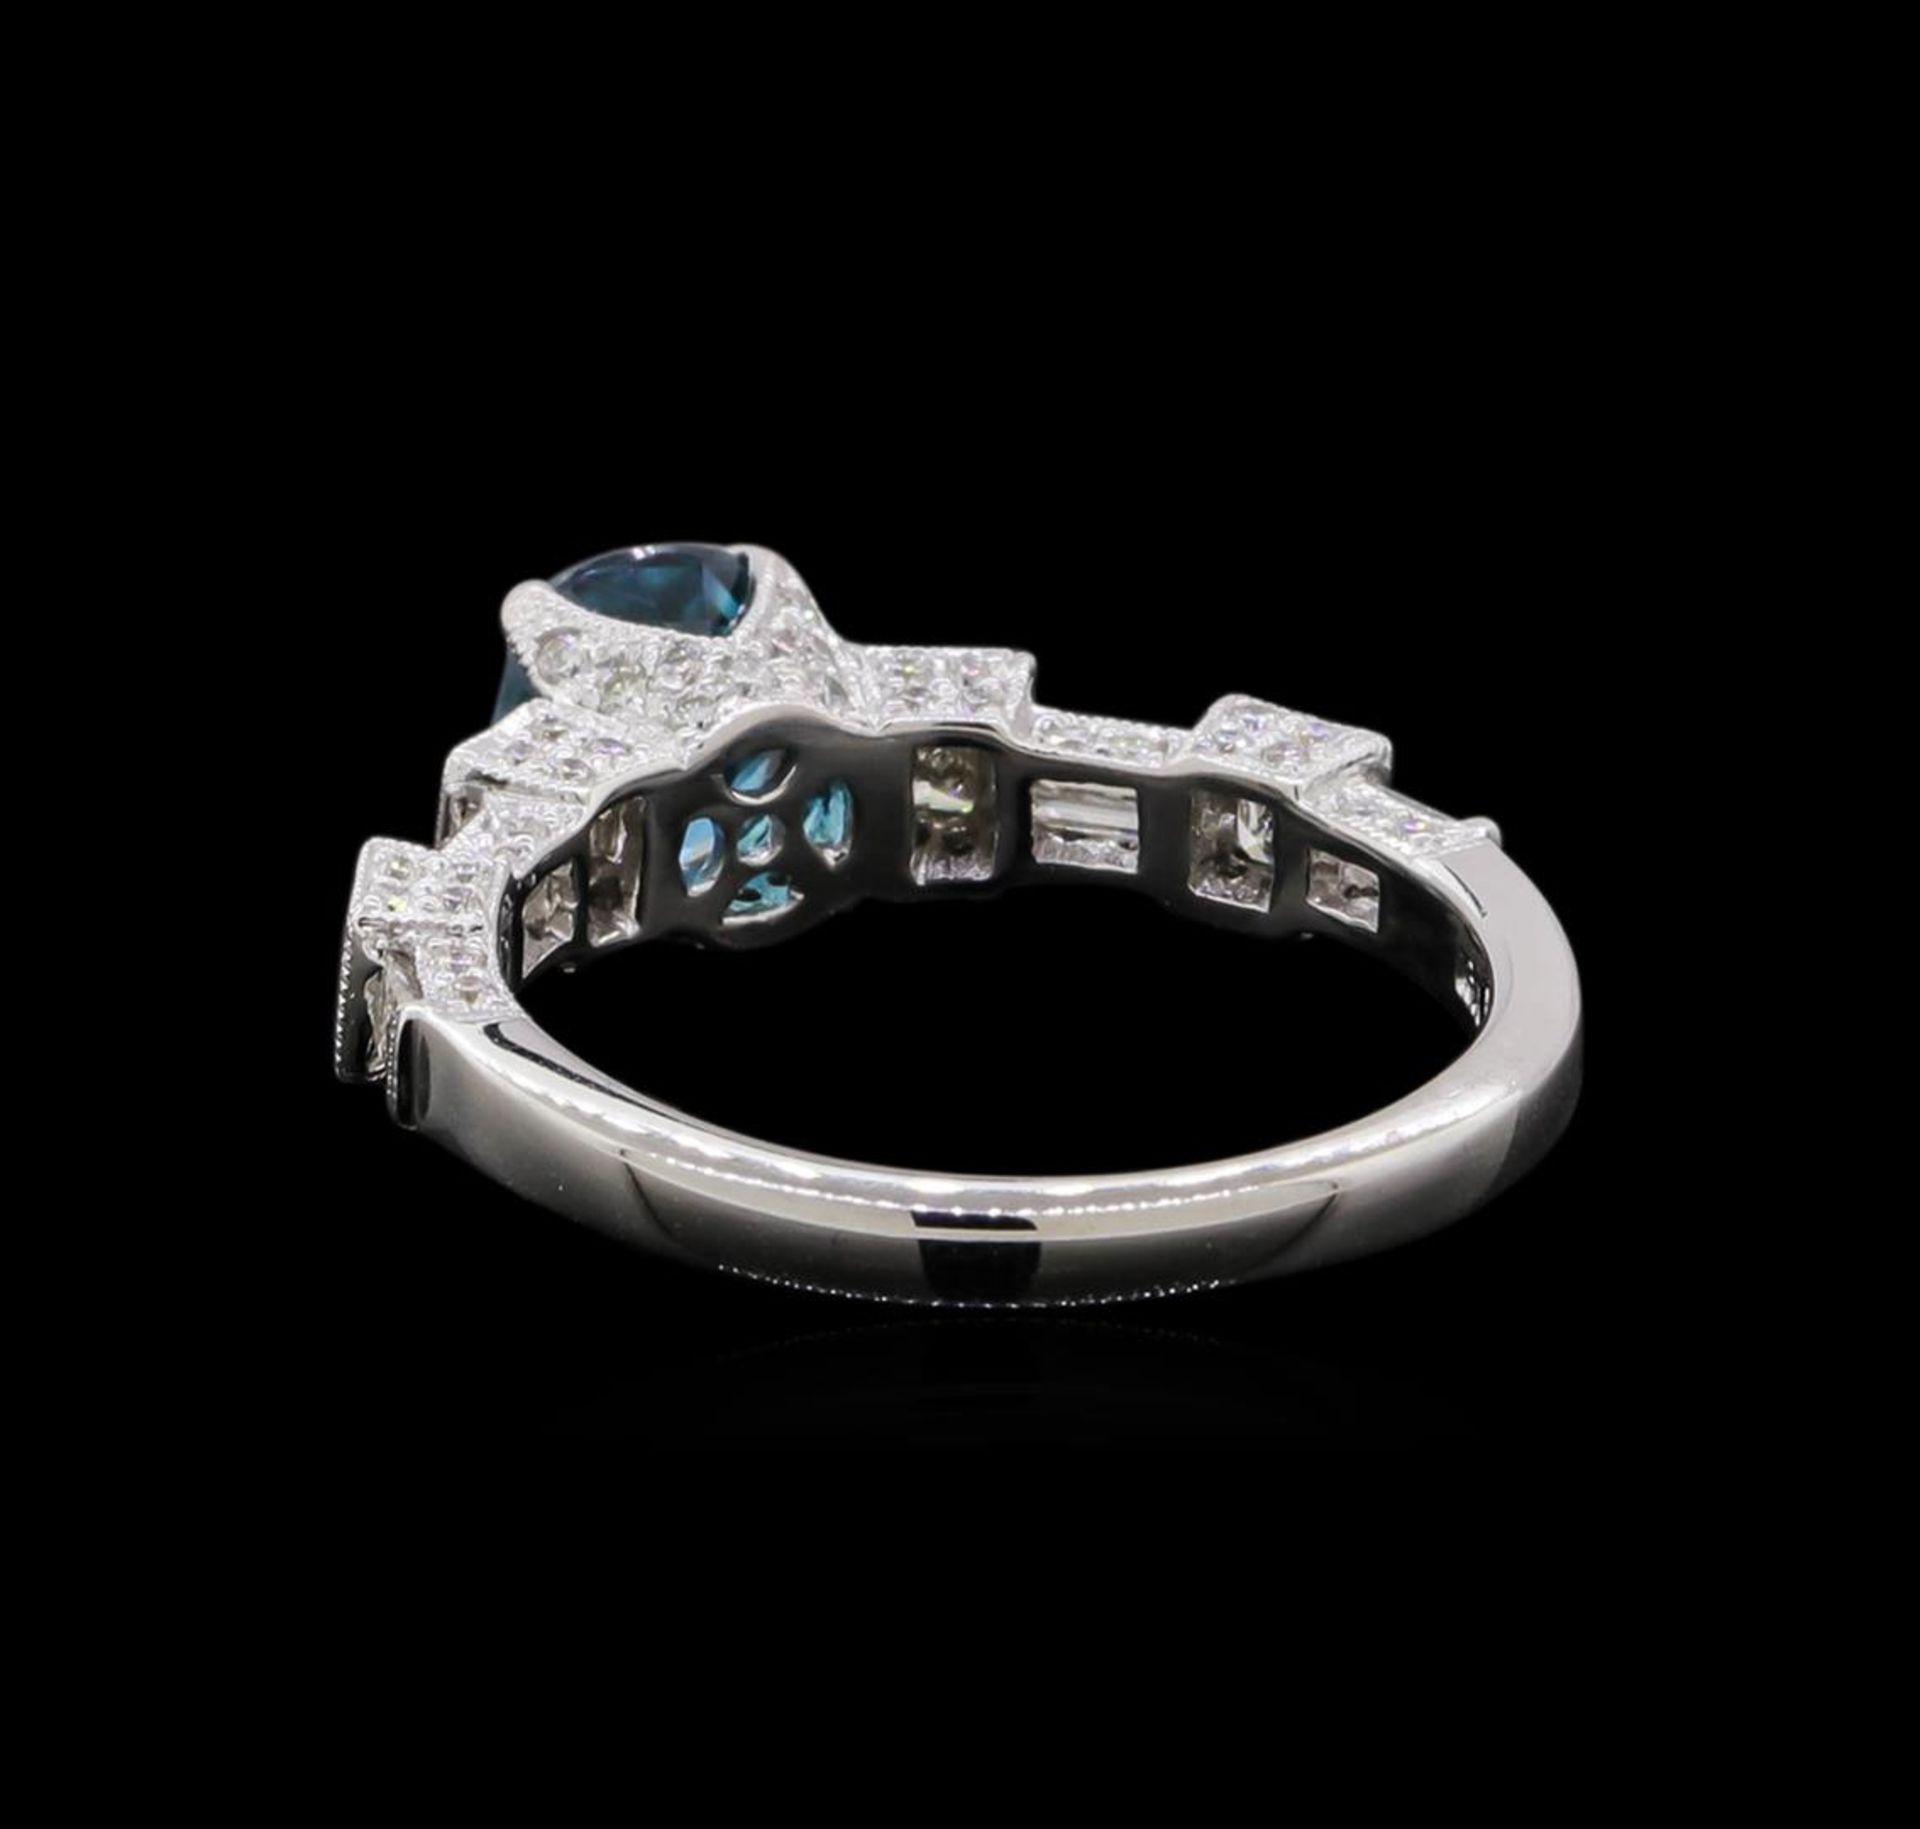 1.92 ctw Blue Zircon and Diamond Ring - 18KT White Gold - Image 3 of 5